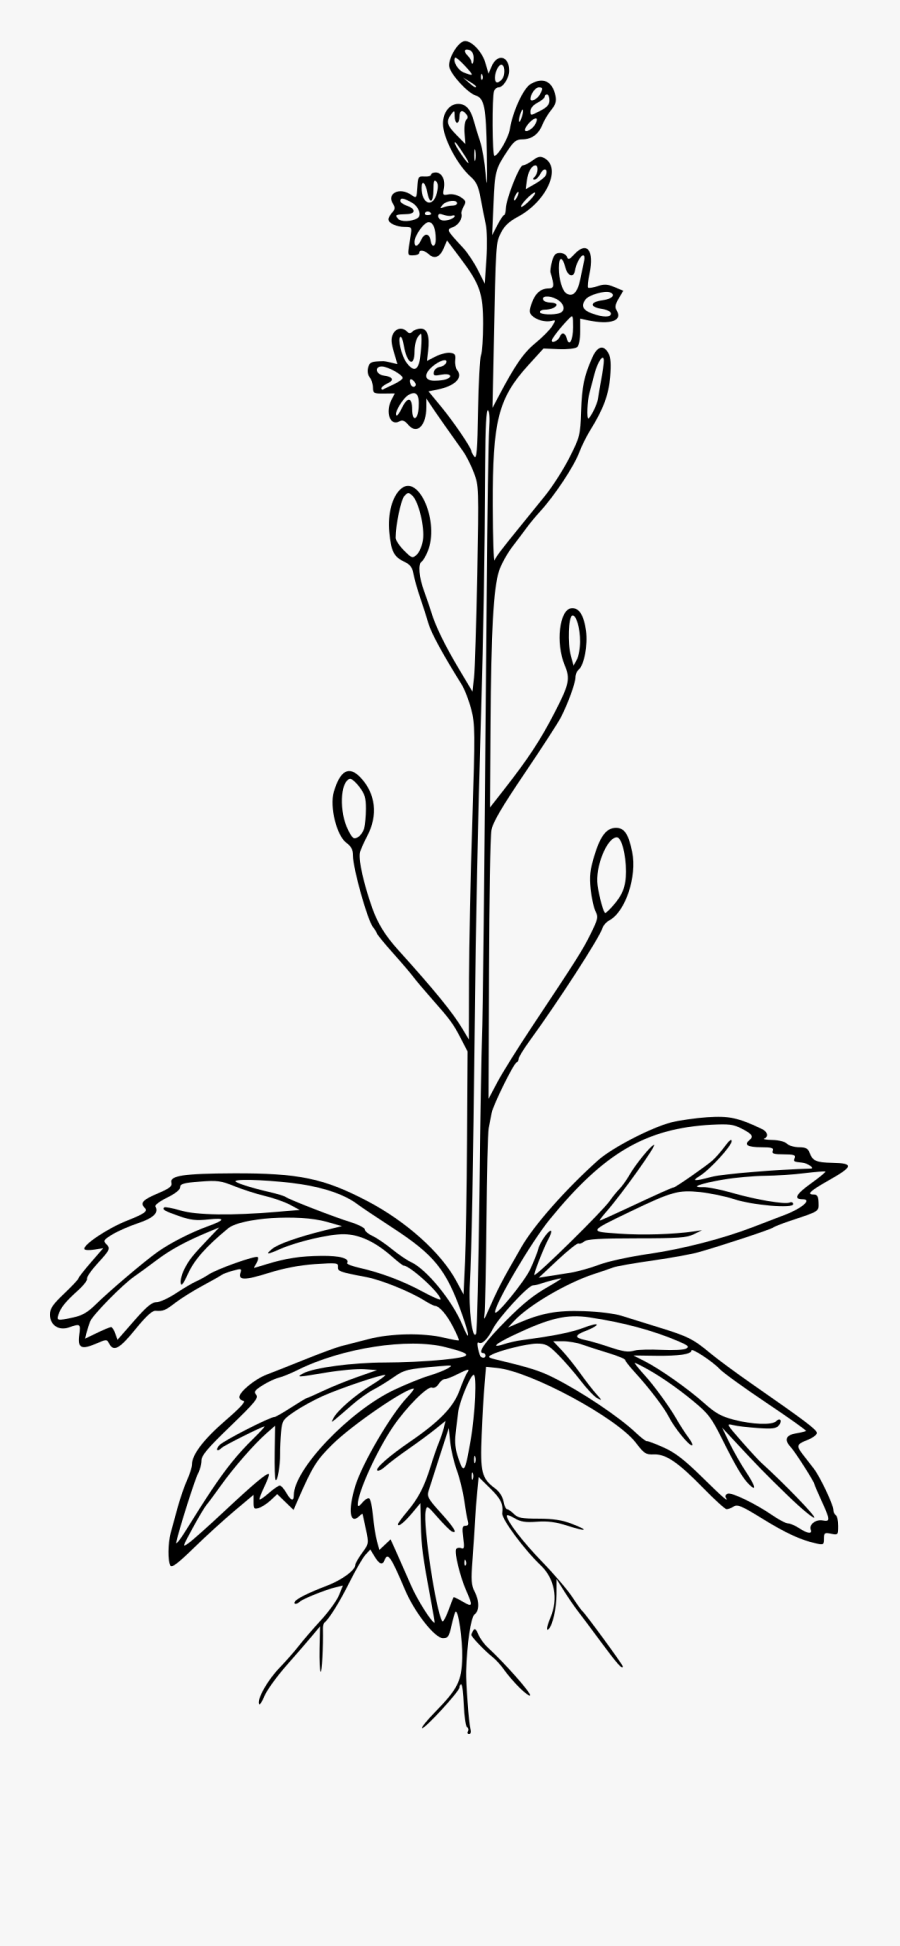 Spring Whitlow Grass - Coloring Page, Transparent Clipart